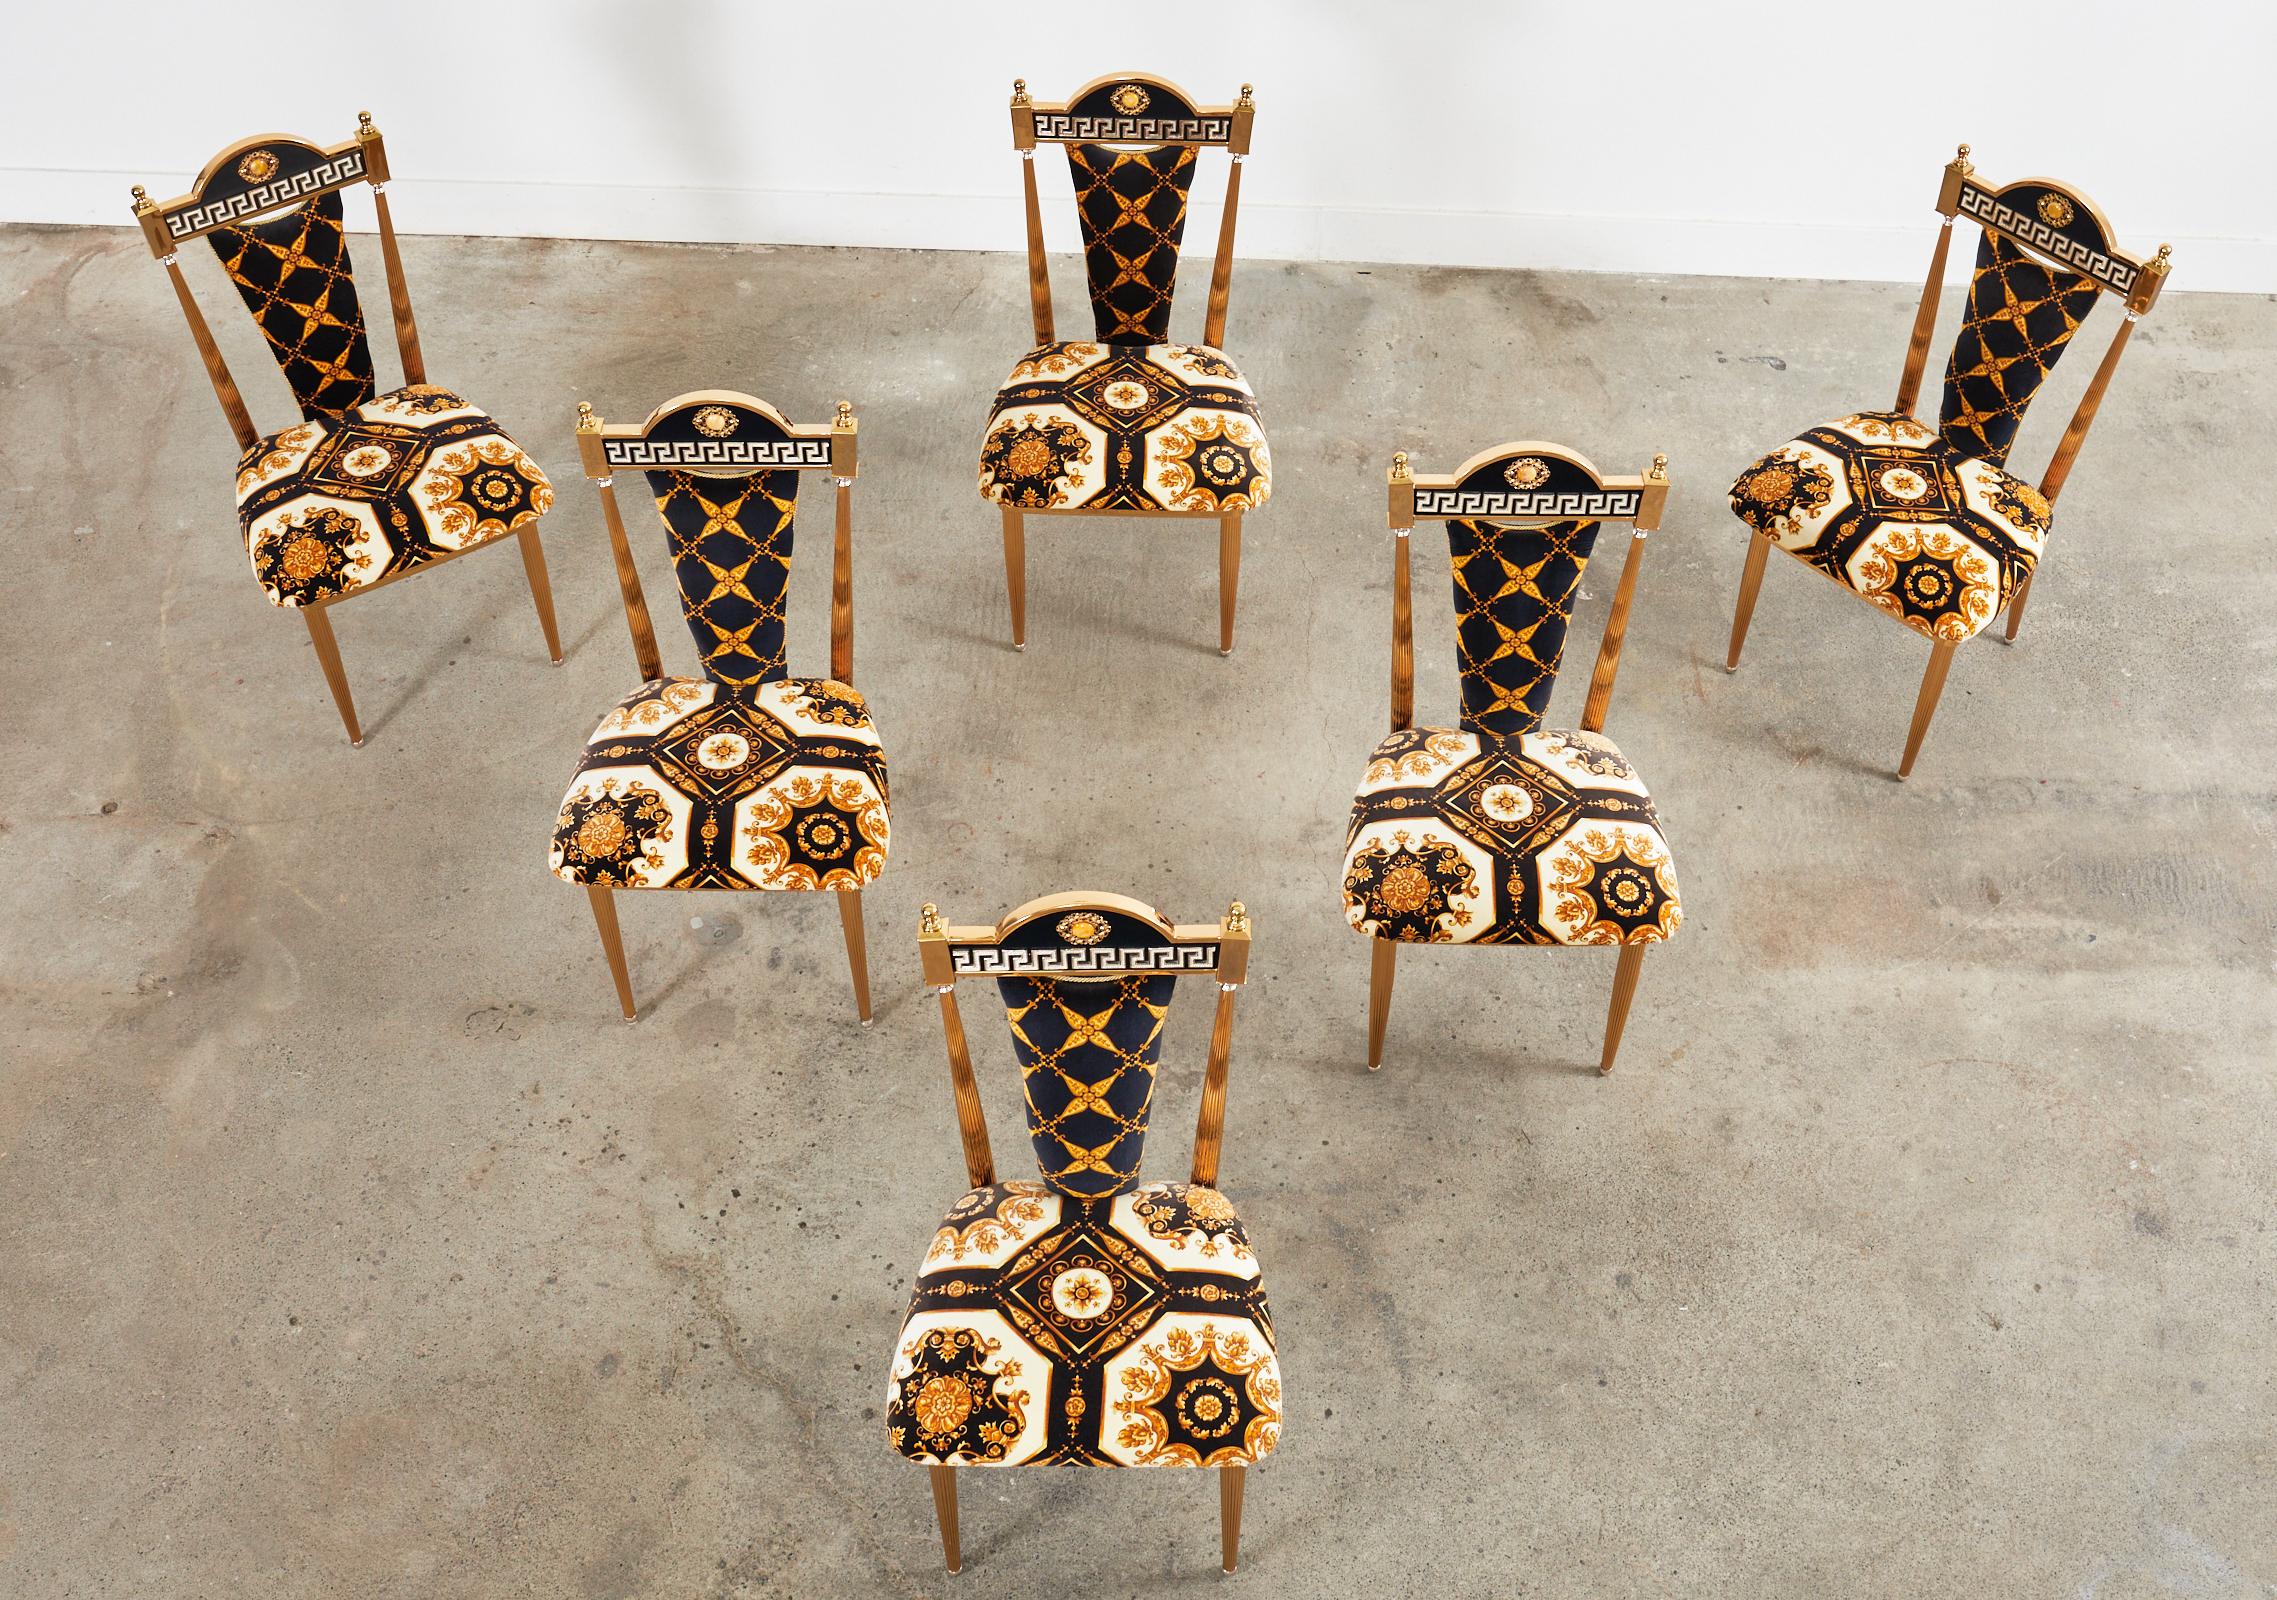 versace dining table and chairs for sale